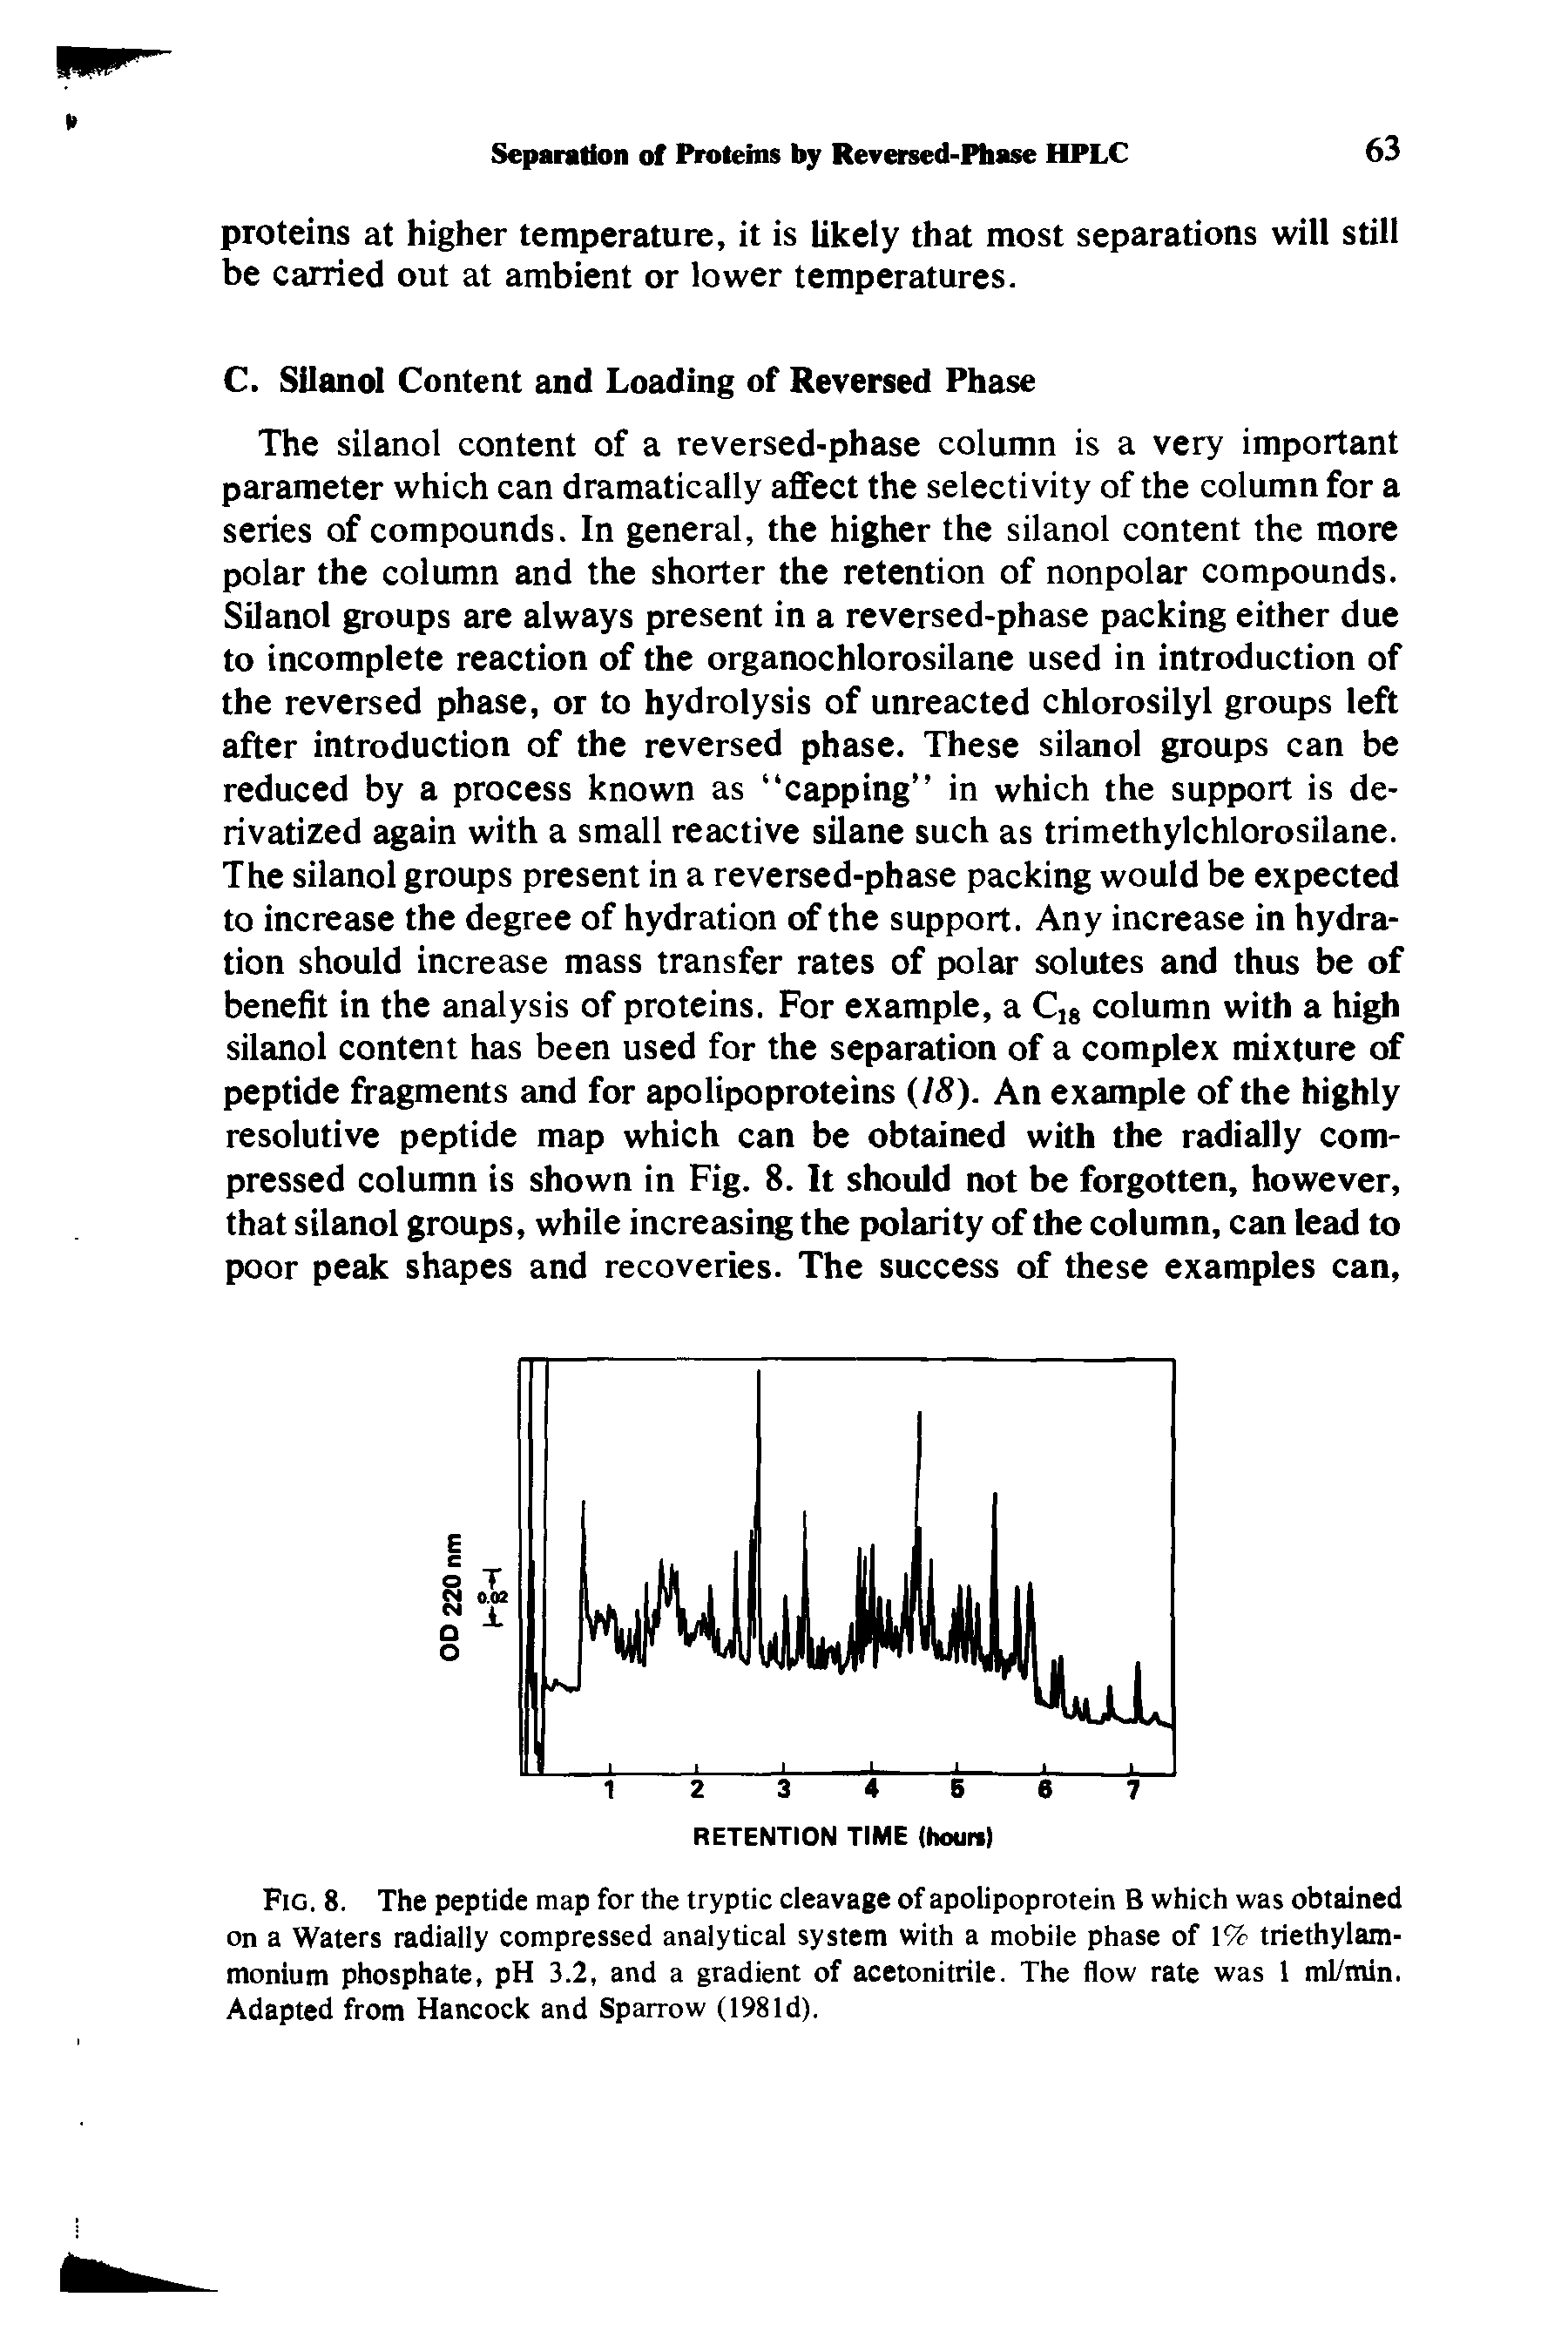 Fig. 8. The peptide map for the tryptic cleavage of apolipoprotein B which was obtained on a Waters radially compressed analytical system with a mobile phase of 1% triethylam-monium phosphate, pH 3.2, and a gradient of acetonitrile. The flow rate was 1 ml/min. Adapted from Hancock and Sparrow (1981d).